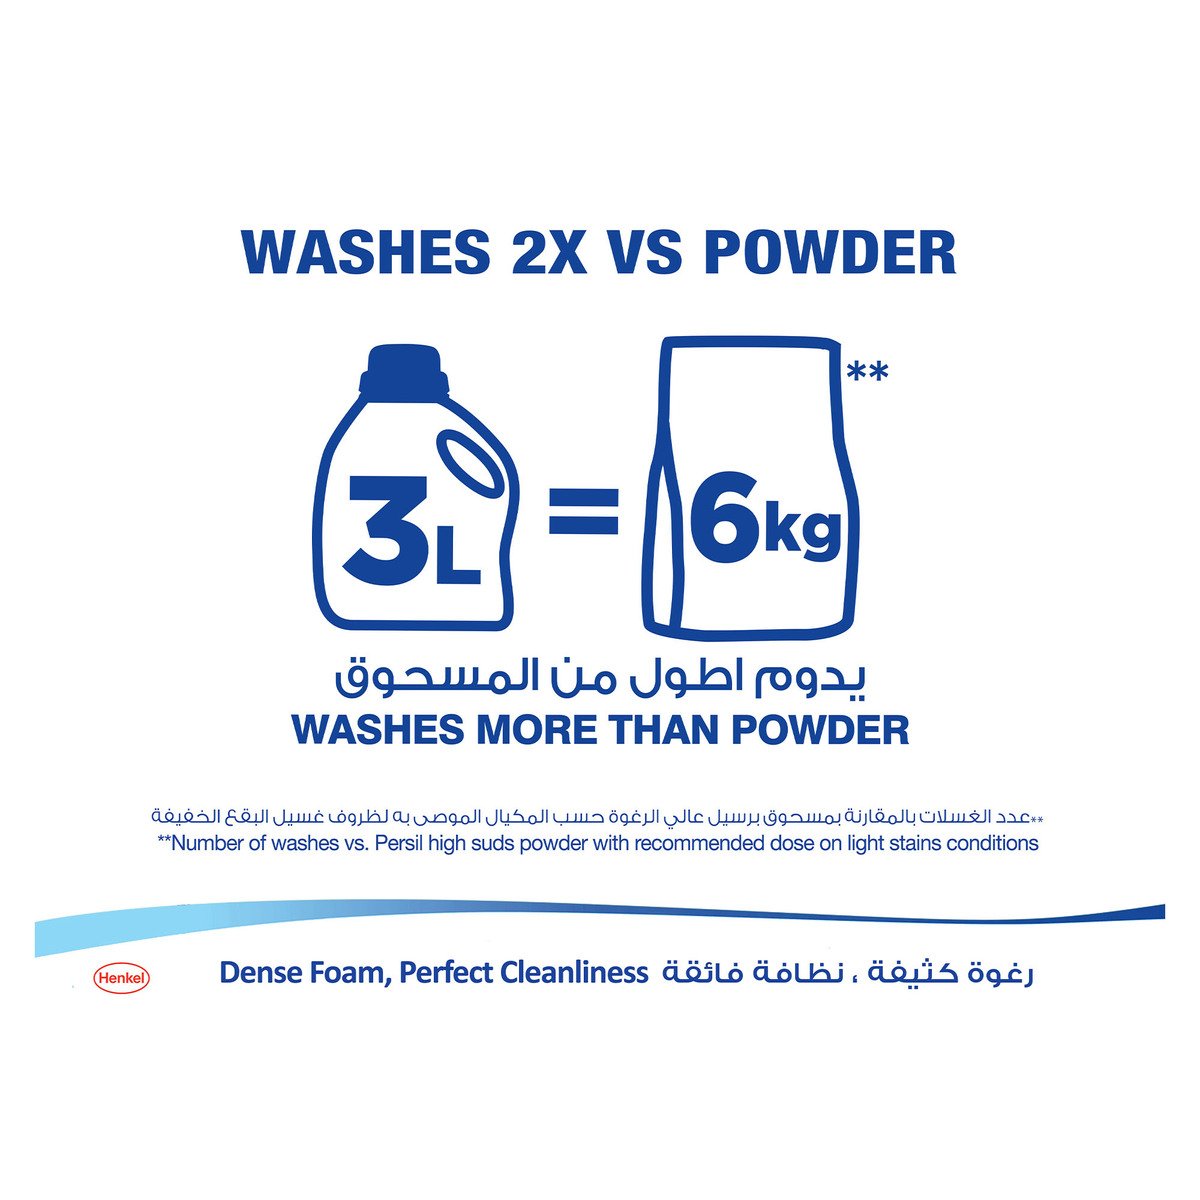 Persil Power Gel Oud Perfume For Top Loading Washing Machines 3 Litres